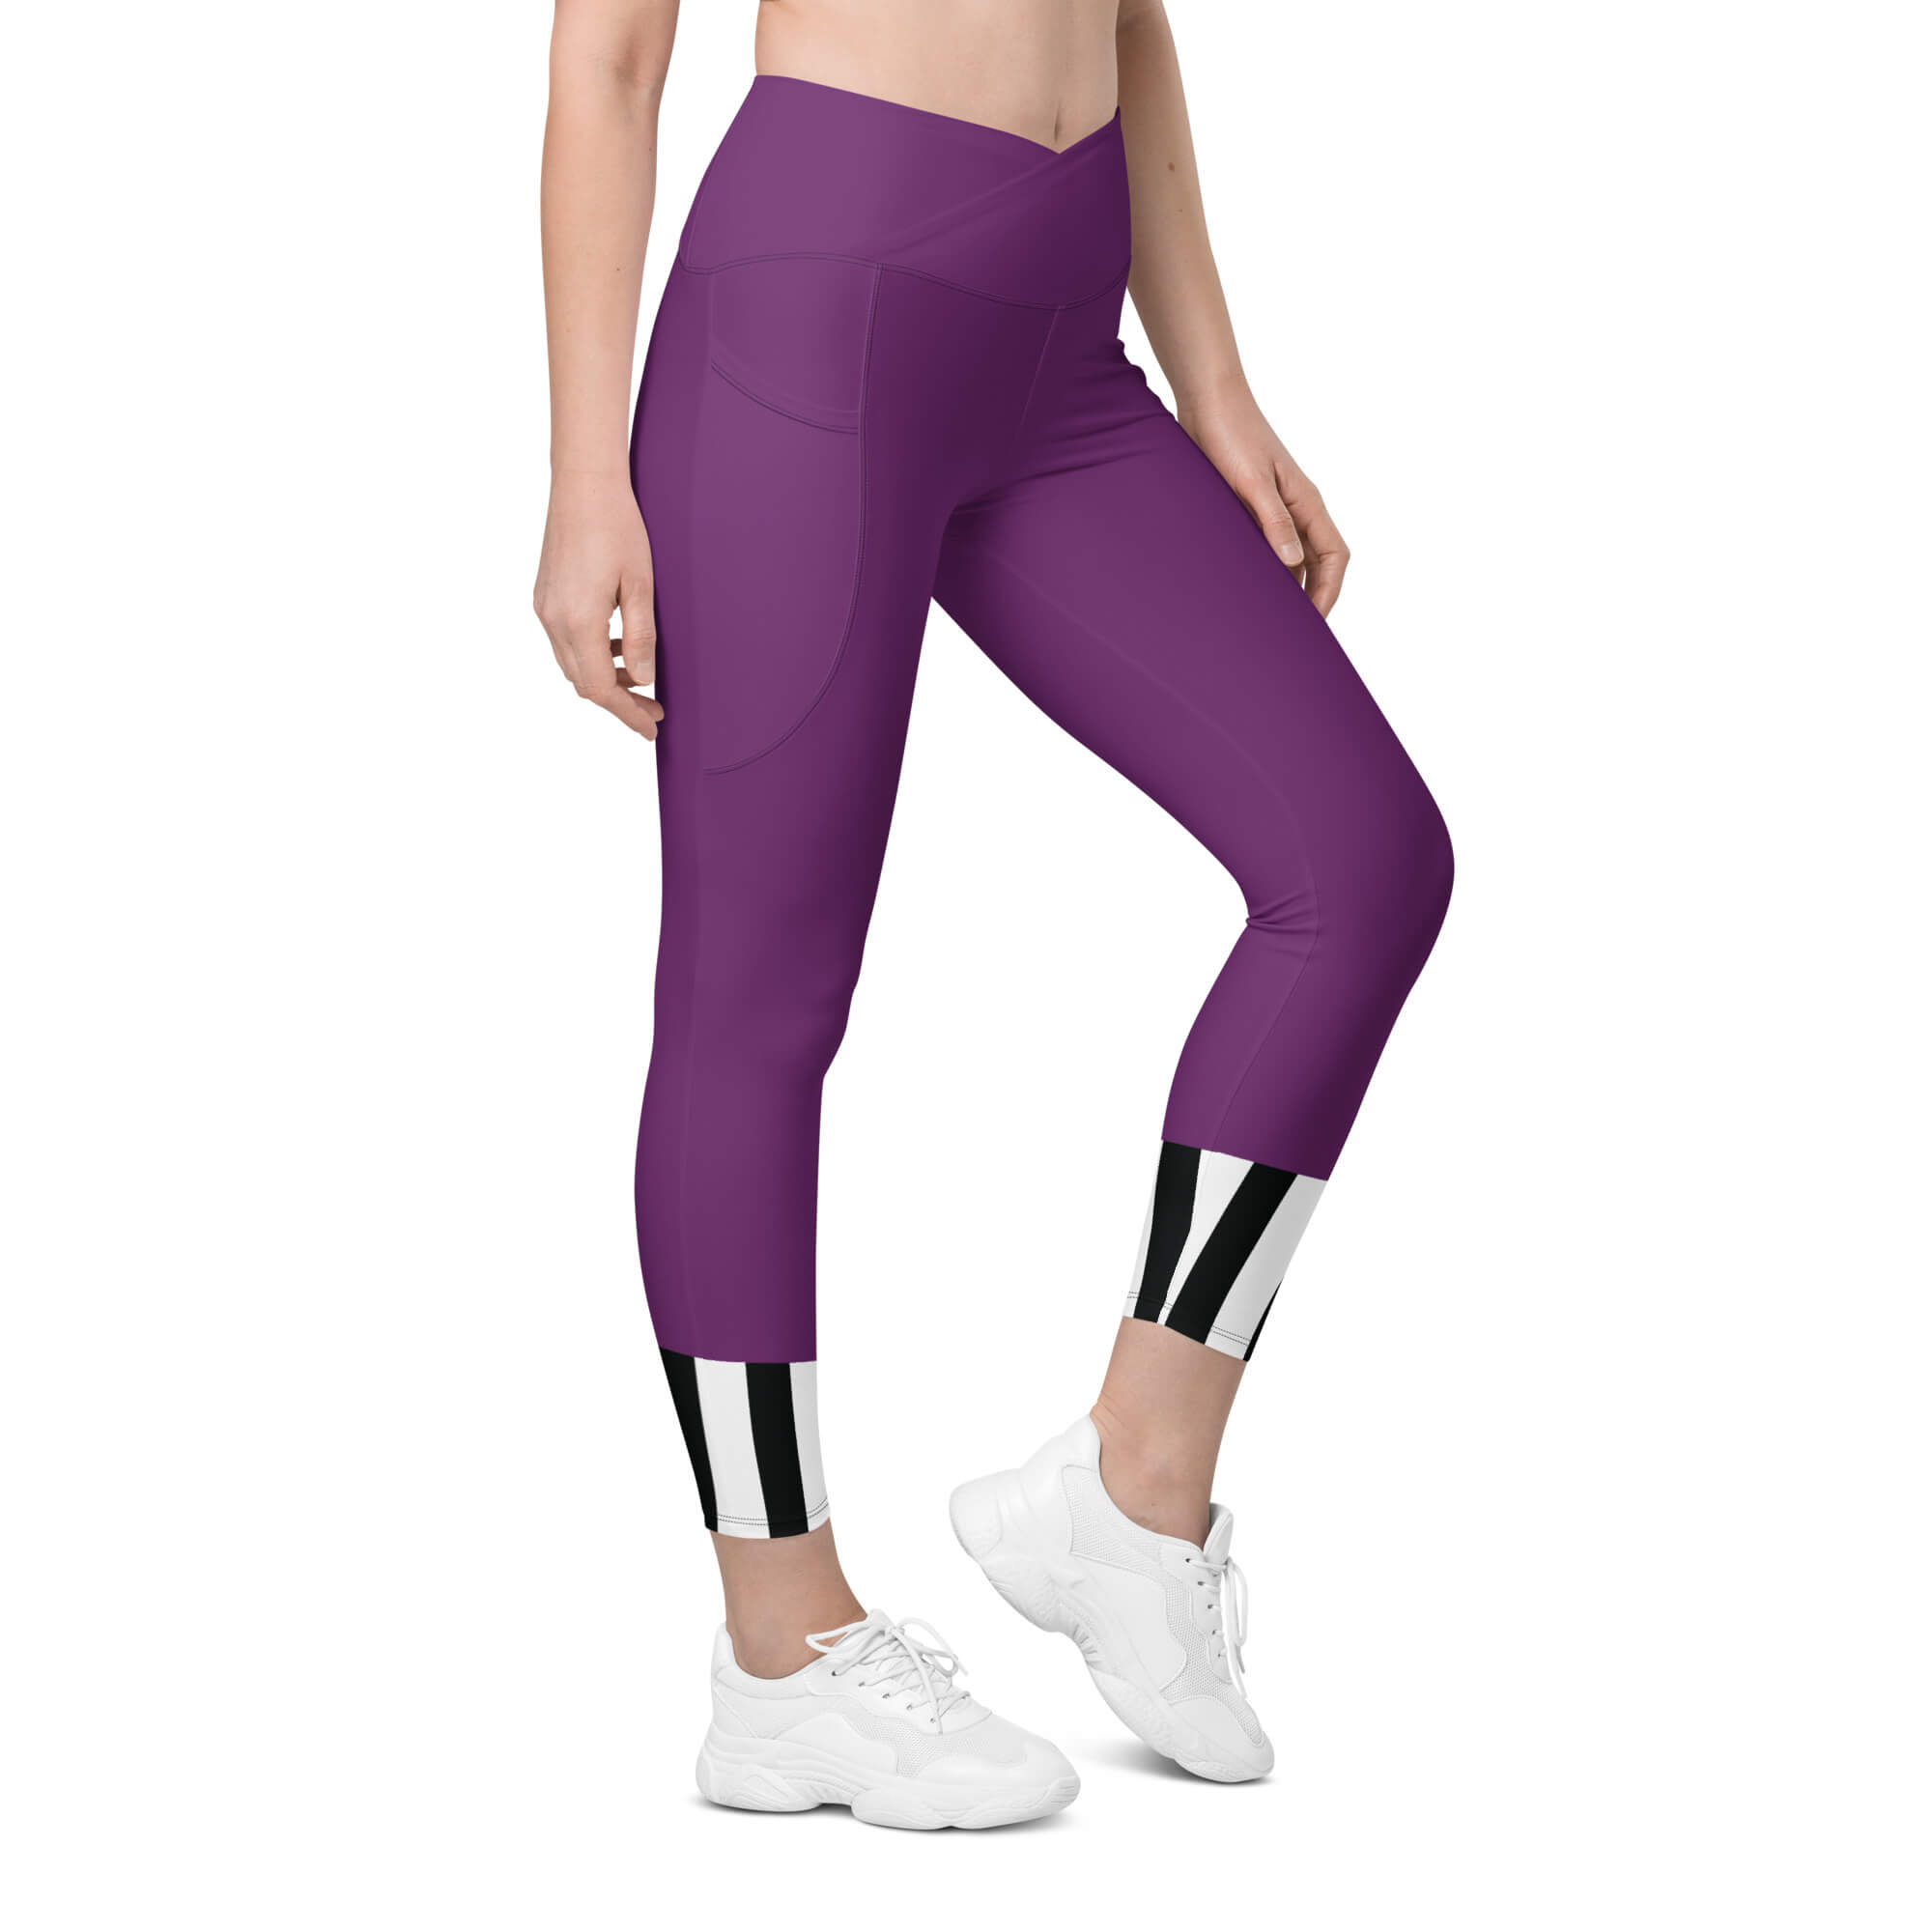 Turban ver3 crossover leggings with pockets - Shop 63